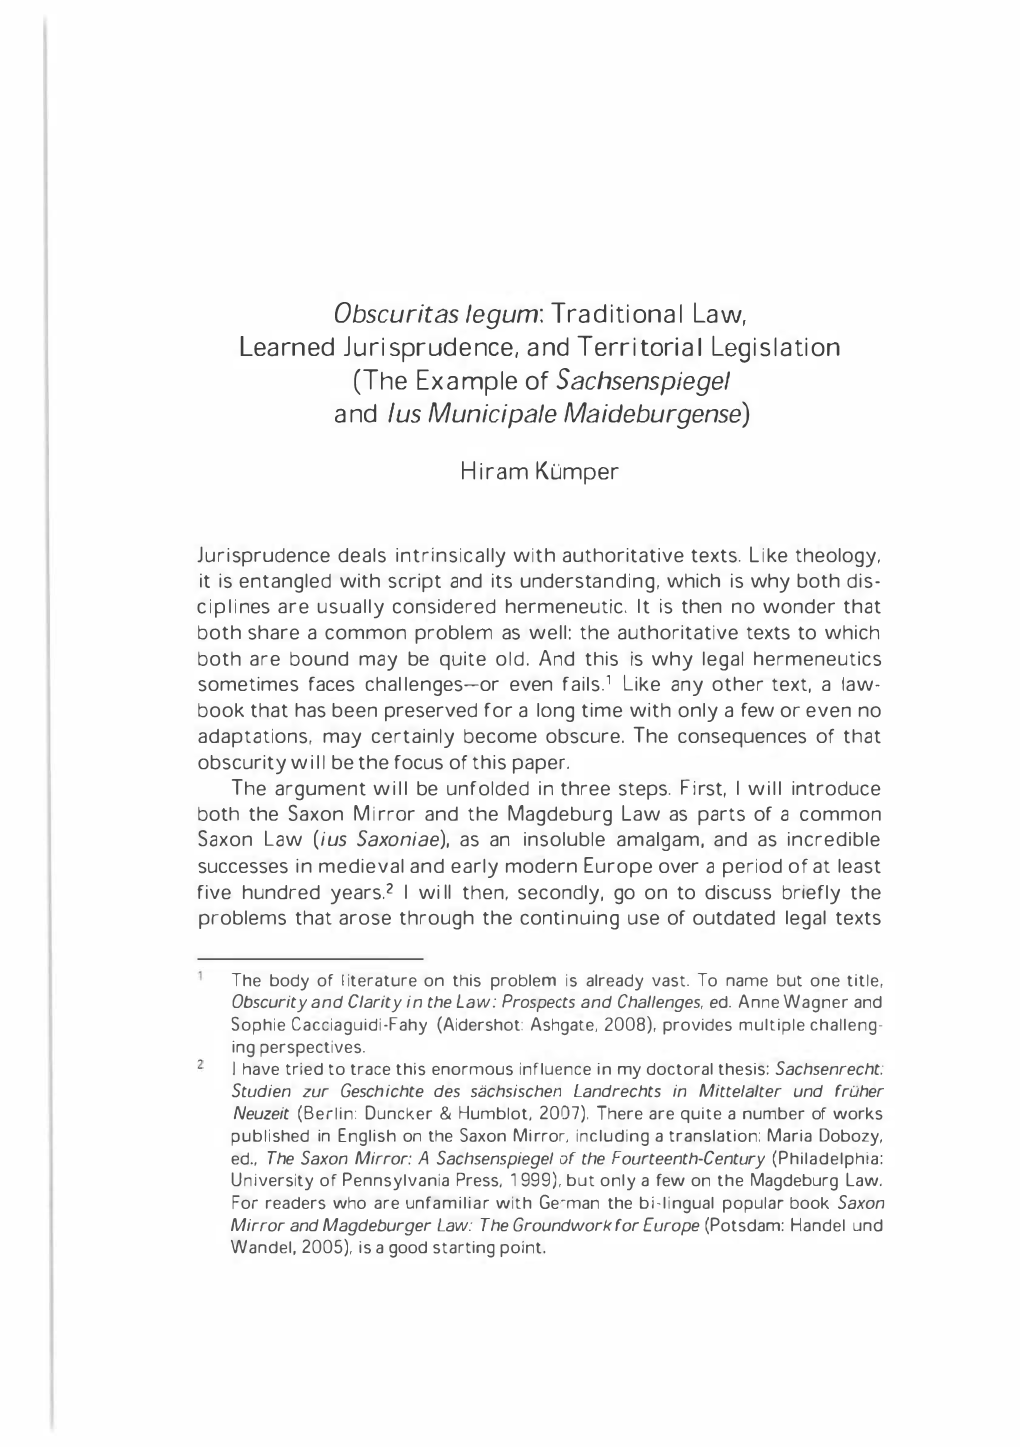 Obscuritas Legum: Traditional Law, Learned Jurisprudence, and Territorial Legisl Ation (The Example of Sachsenspiegel and /Us Municipale Maideburgense)